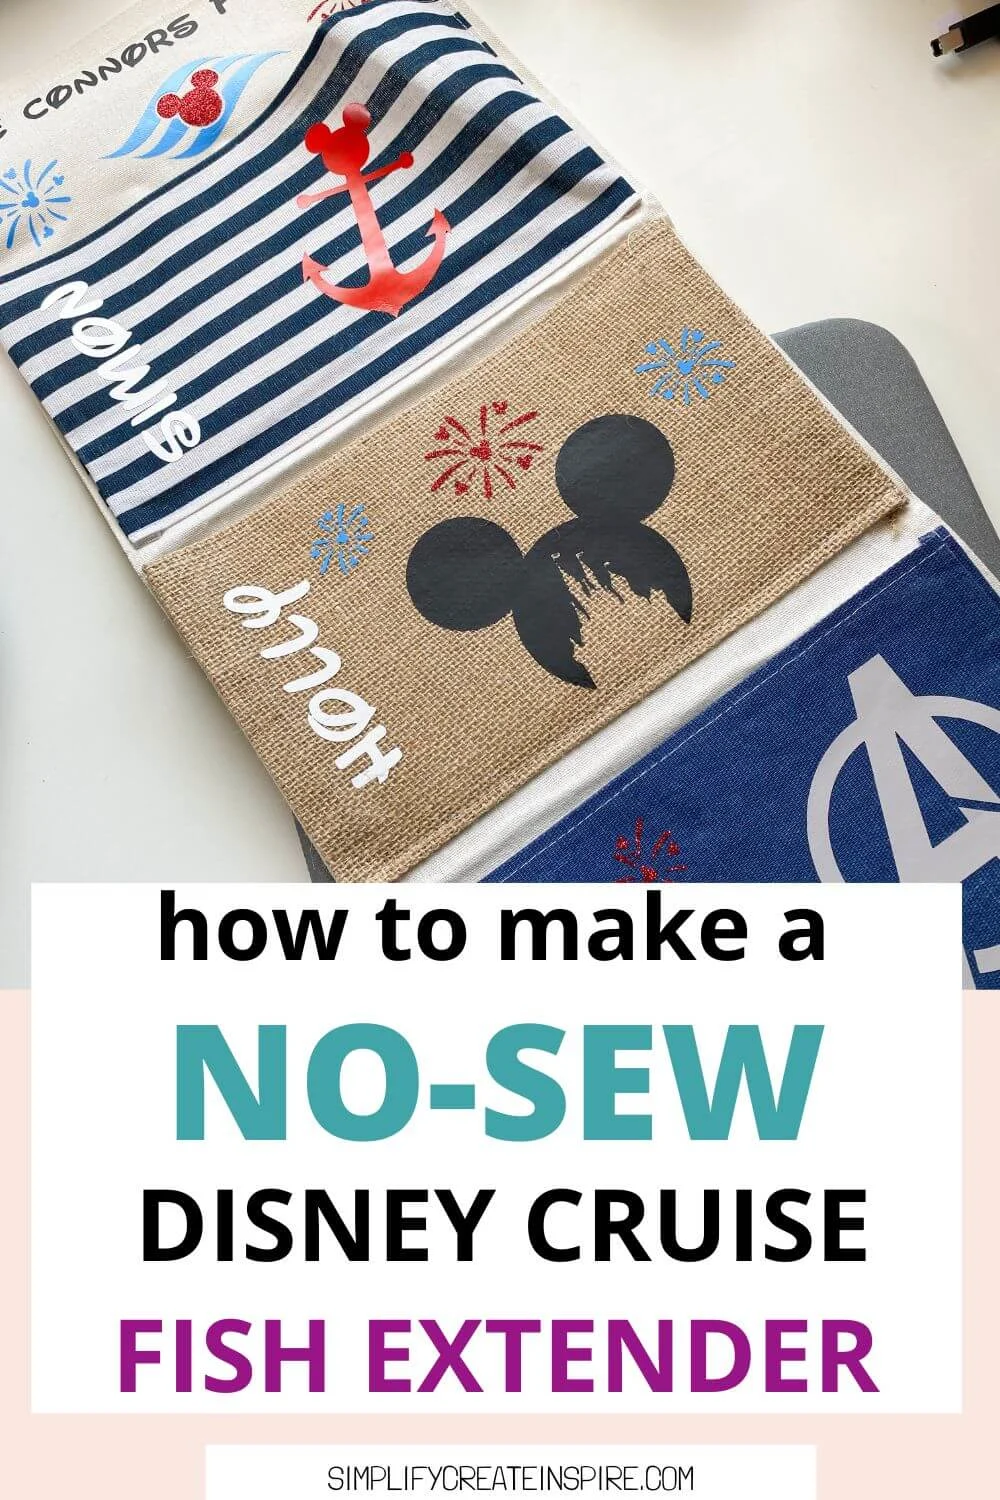 How to make a no sew disney fish extender hanger.